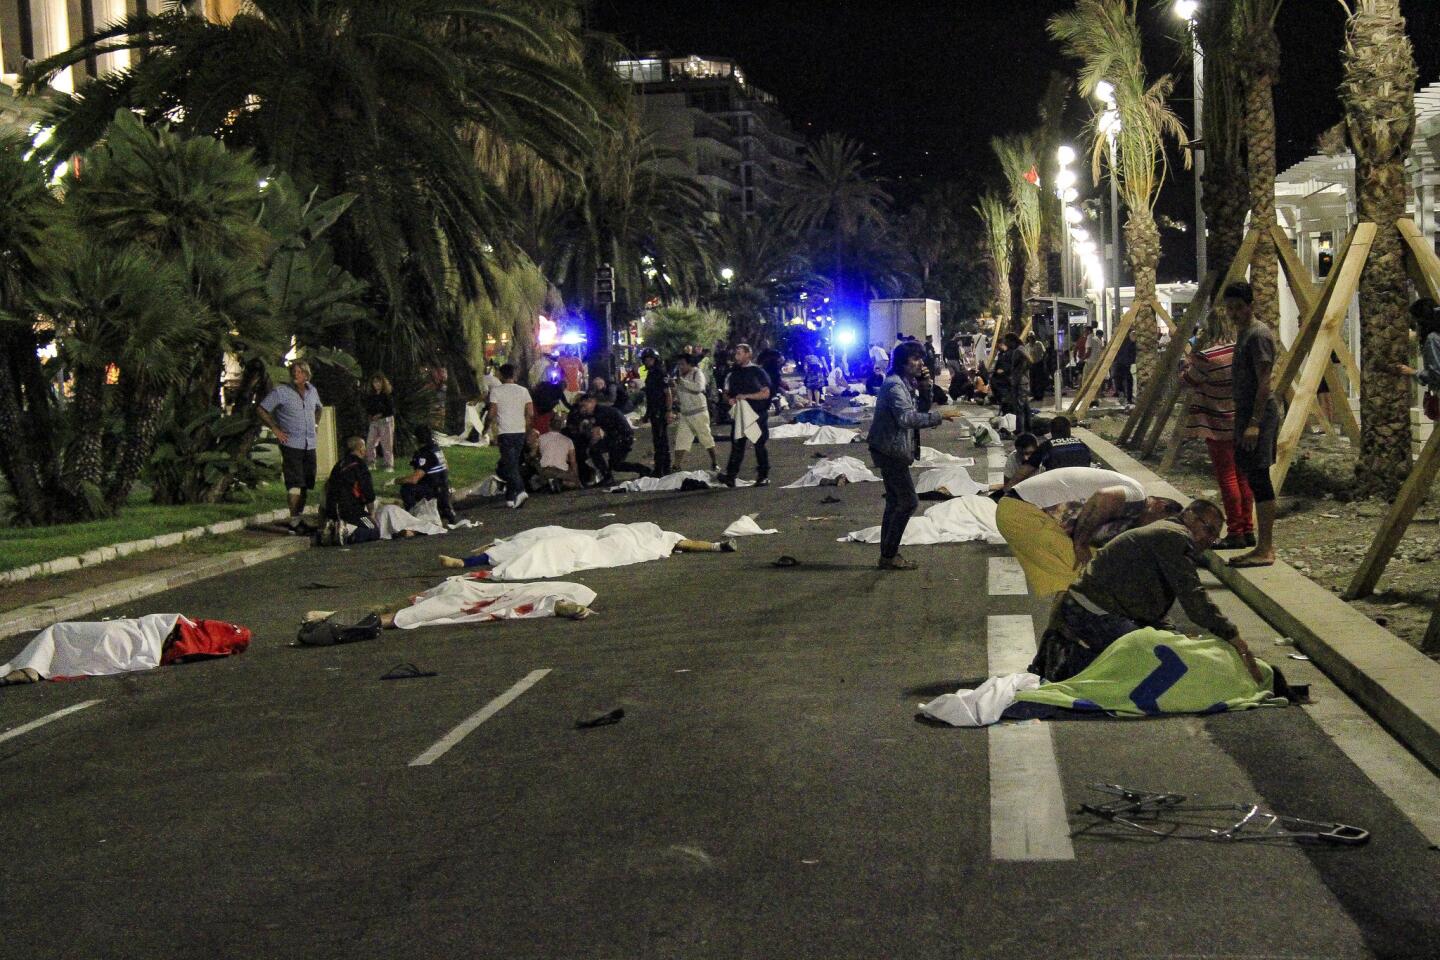 Bodies lay on the street after a truck drove through a crowded seaside promenade in Nice, France, during Bastille Day celebrations, leaving more than 80 dead and hundreds wounded.